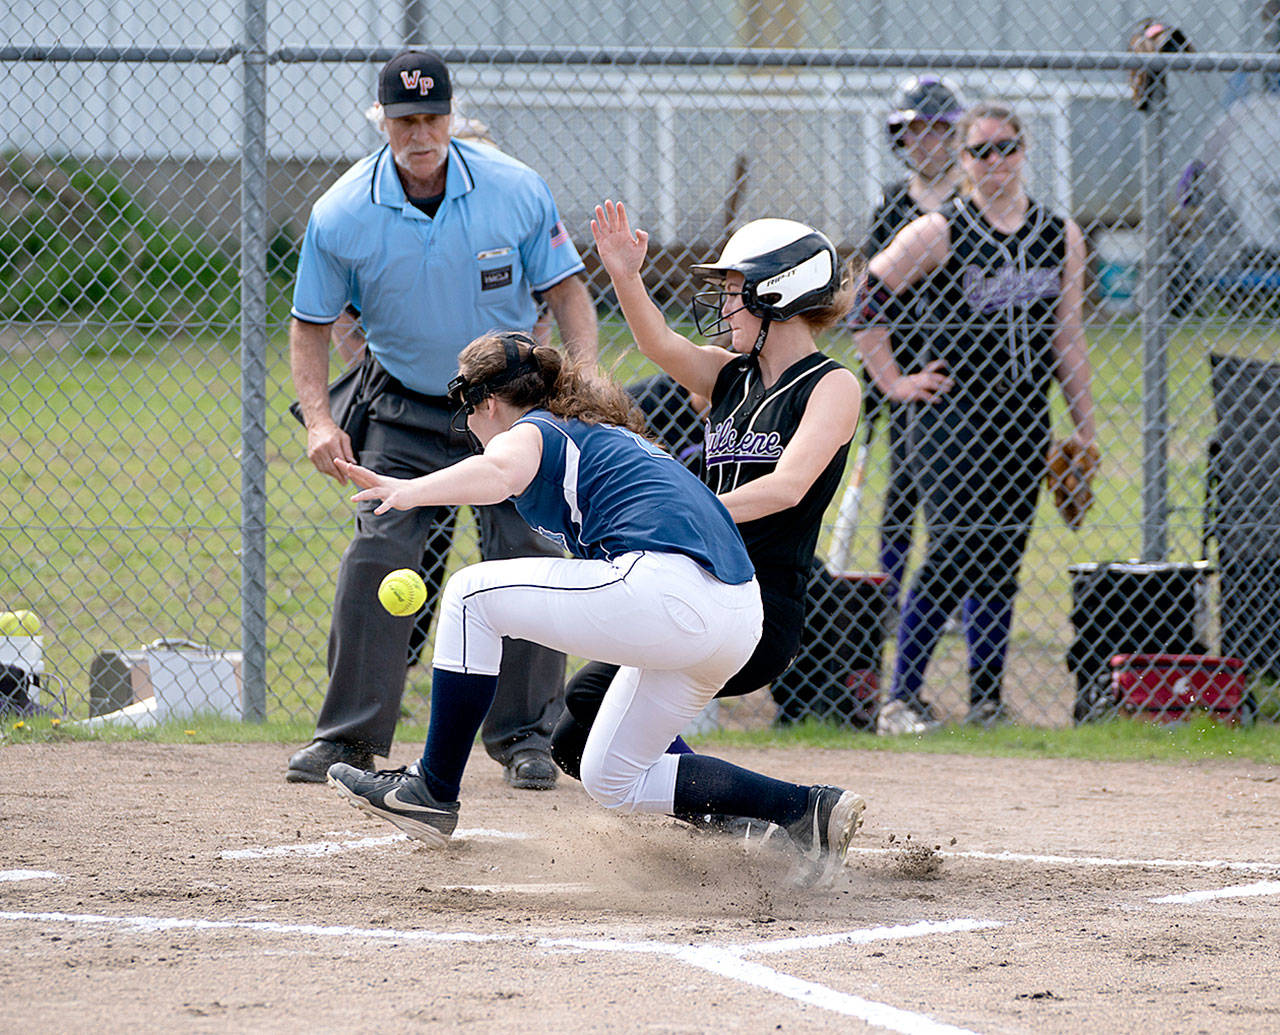 Quilcene’s Kourtney Benek collides with Rainier Christian catcher, Kendra Dieber and scores a run in the 1B League Championship game in Quilcene on Friday. (Steve Mullensky/for Peninsula Daily News)